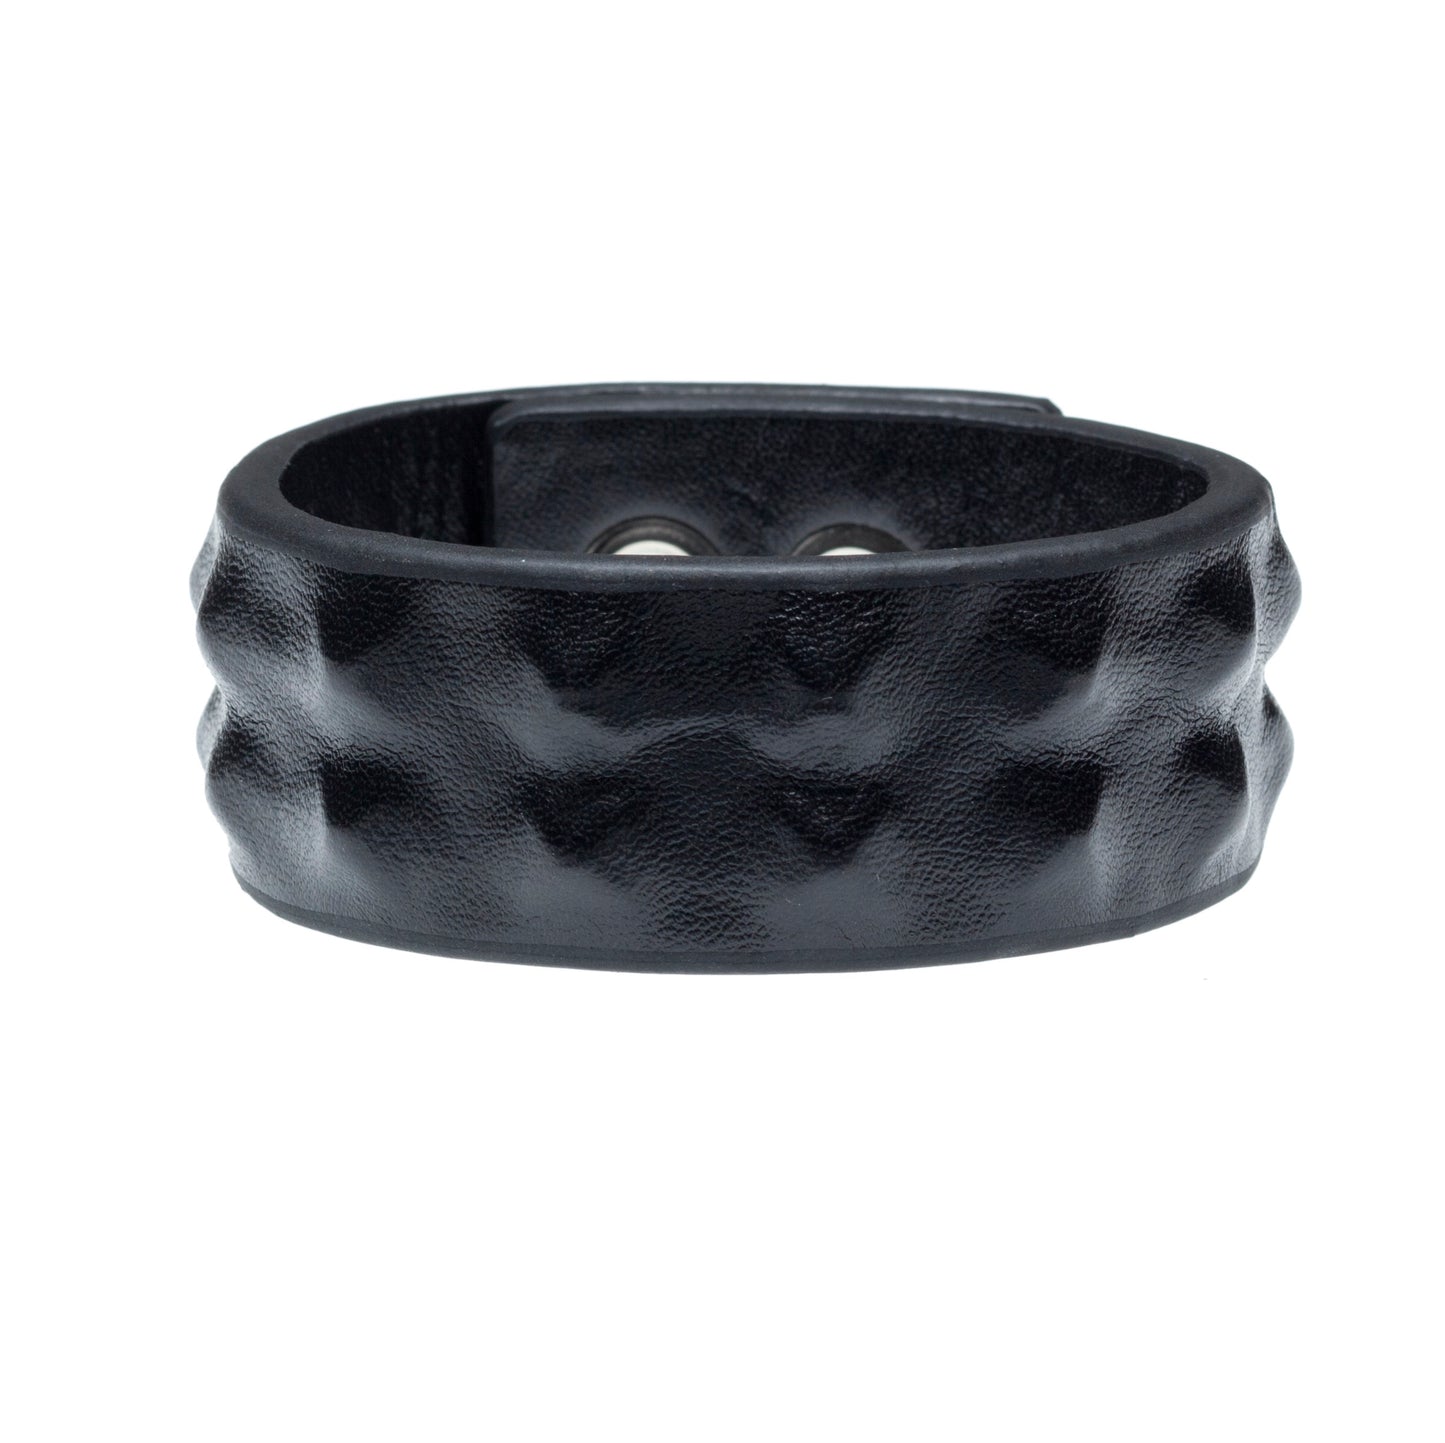 Black Faux Leather Spiked Bracelet With Snap Closure